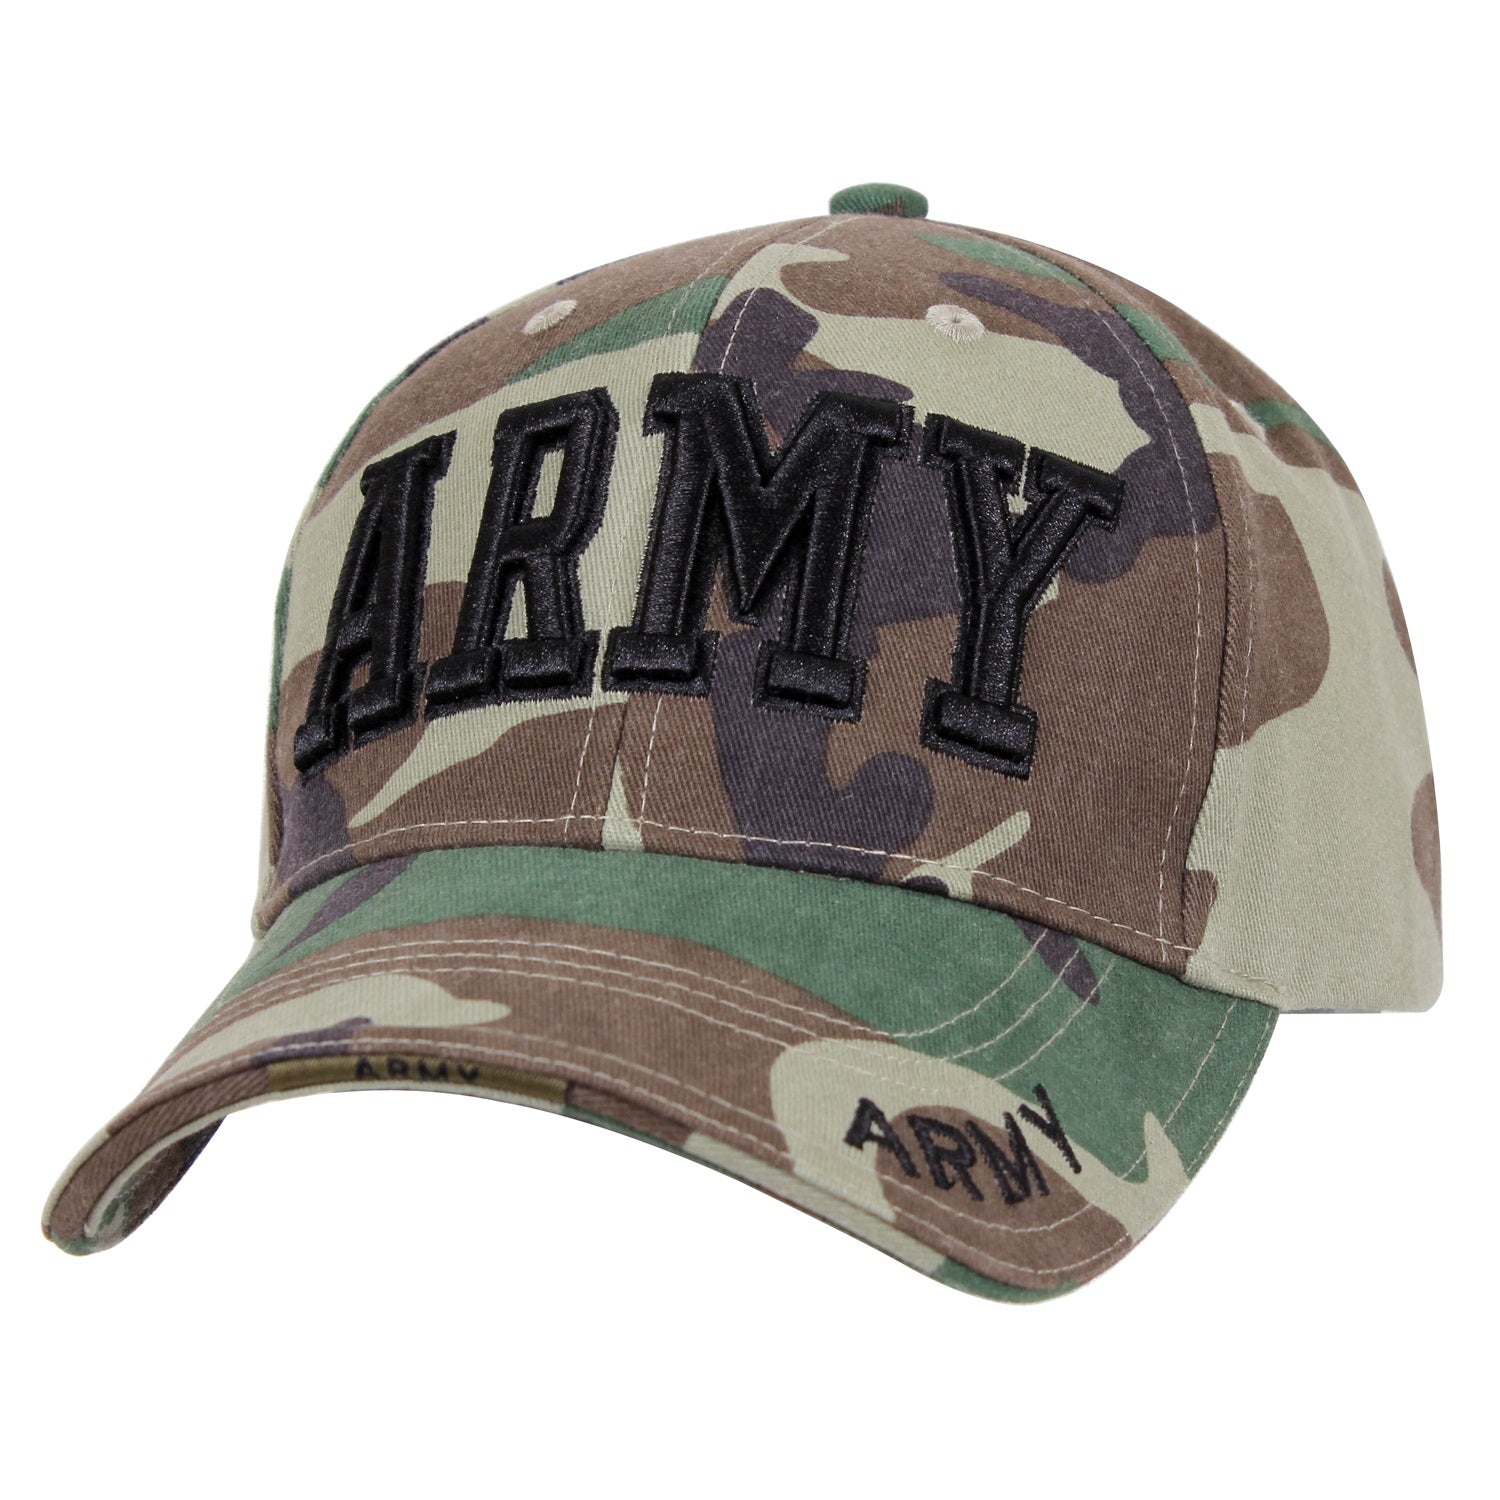 Rothco Deluxe Army Embroidered Low Profile Insignia Cap Woodland Camo